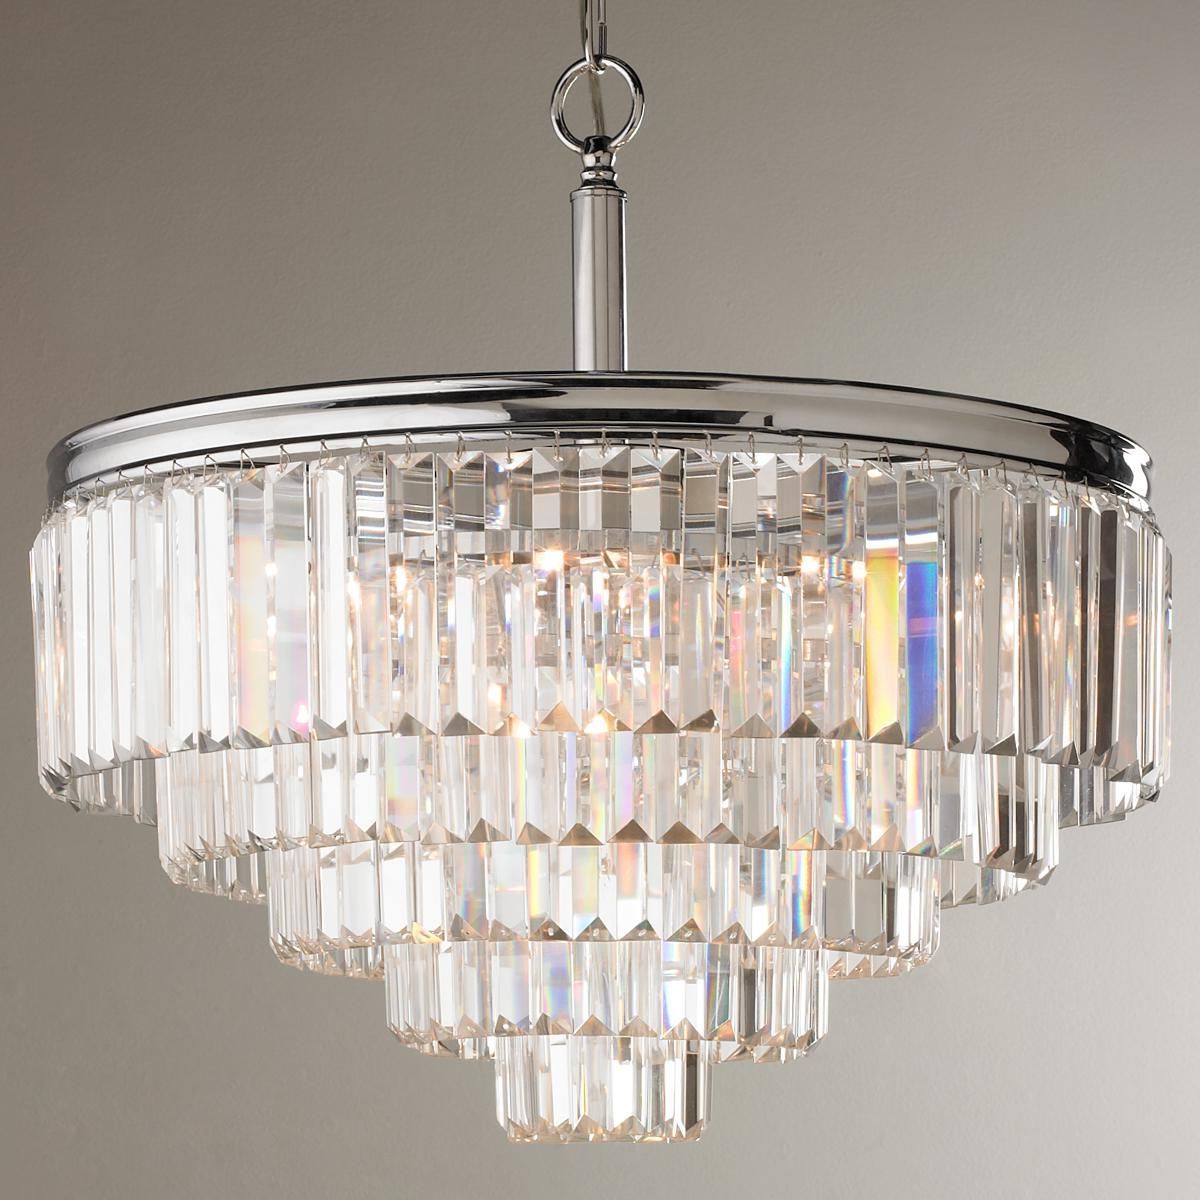 Mcknight 9 Light Chandeliers Regarding Most Recently Released Modern Faceted Glass Layered Chandelier – Convertible (View 16 of 25)